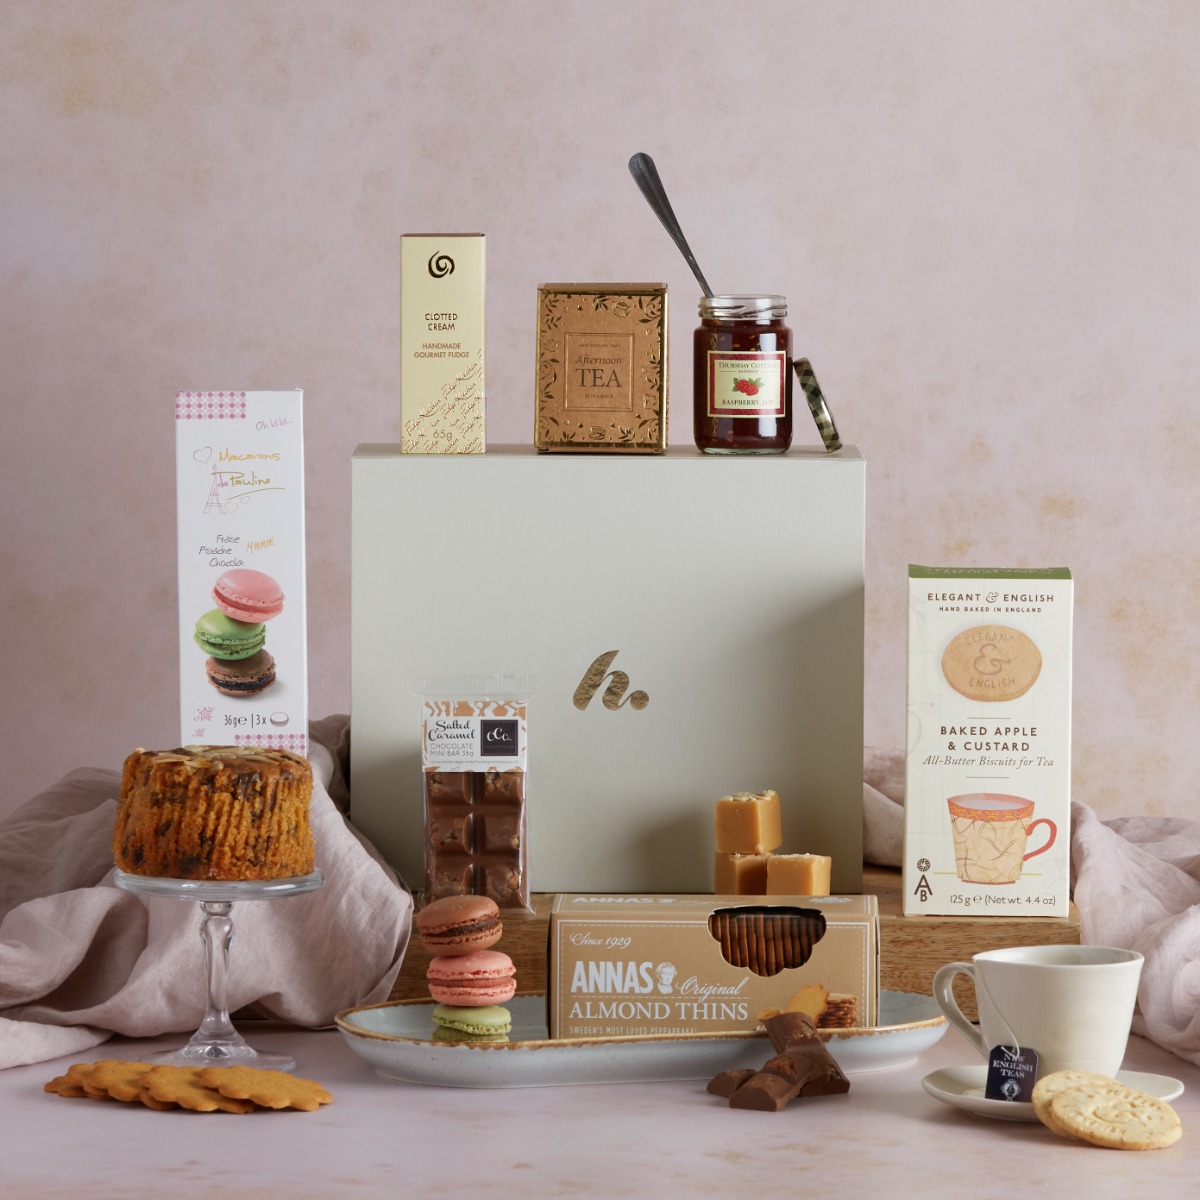 The Afternoon Tea Delights Hamper with contents on display